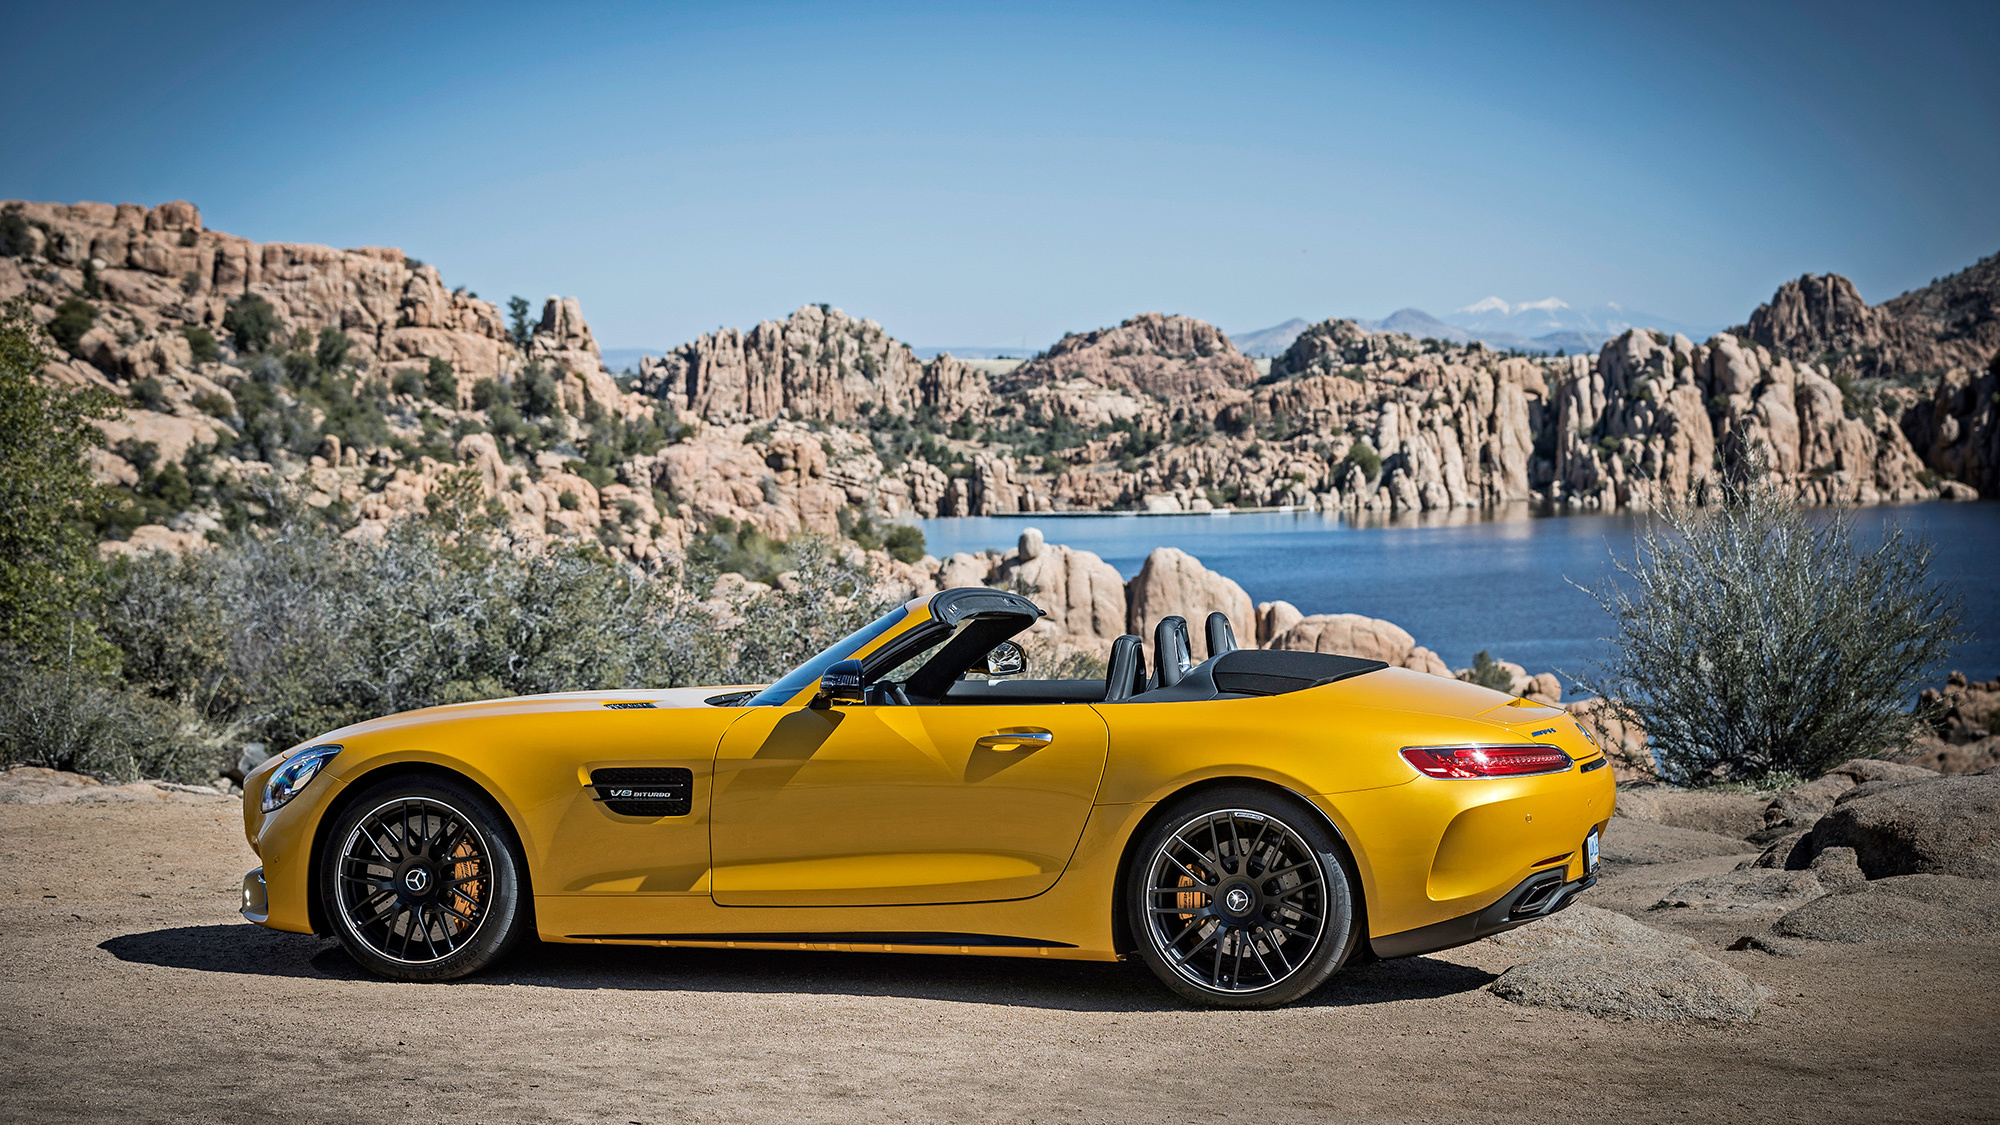 Mercedes AMG GT C Roadster Wallpapers Images Photos